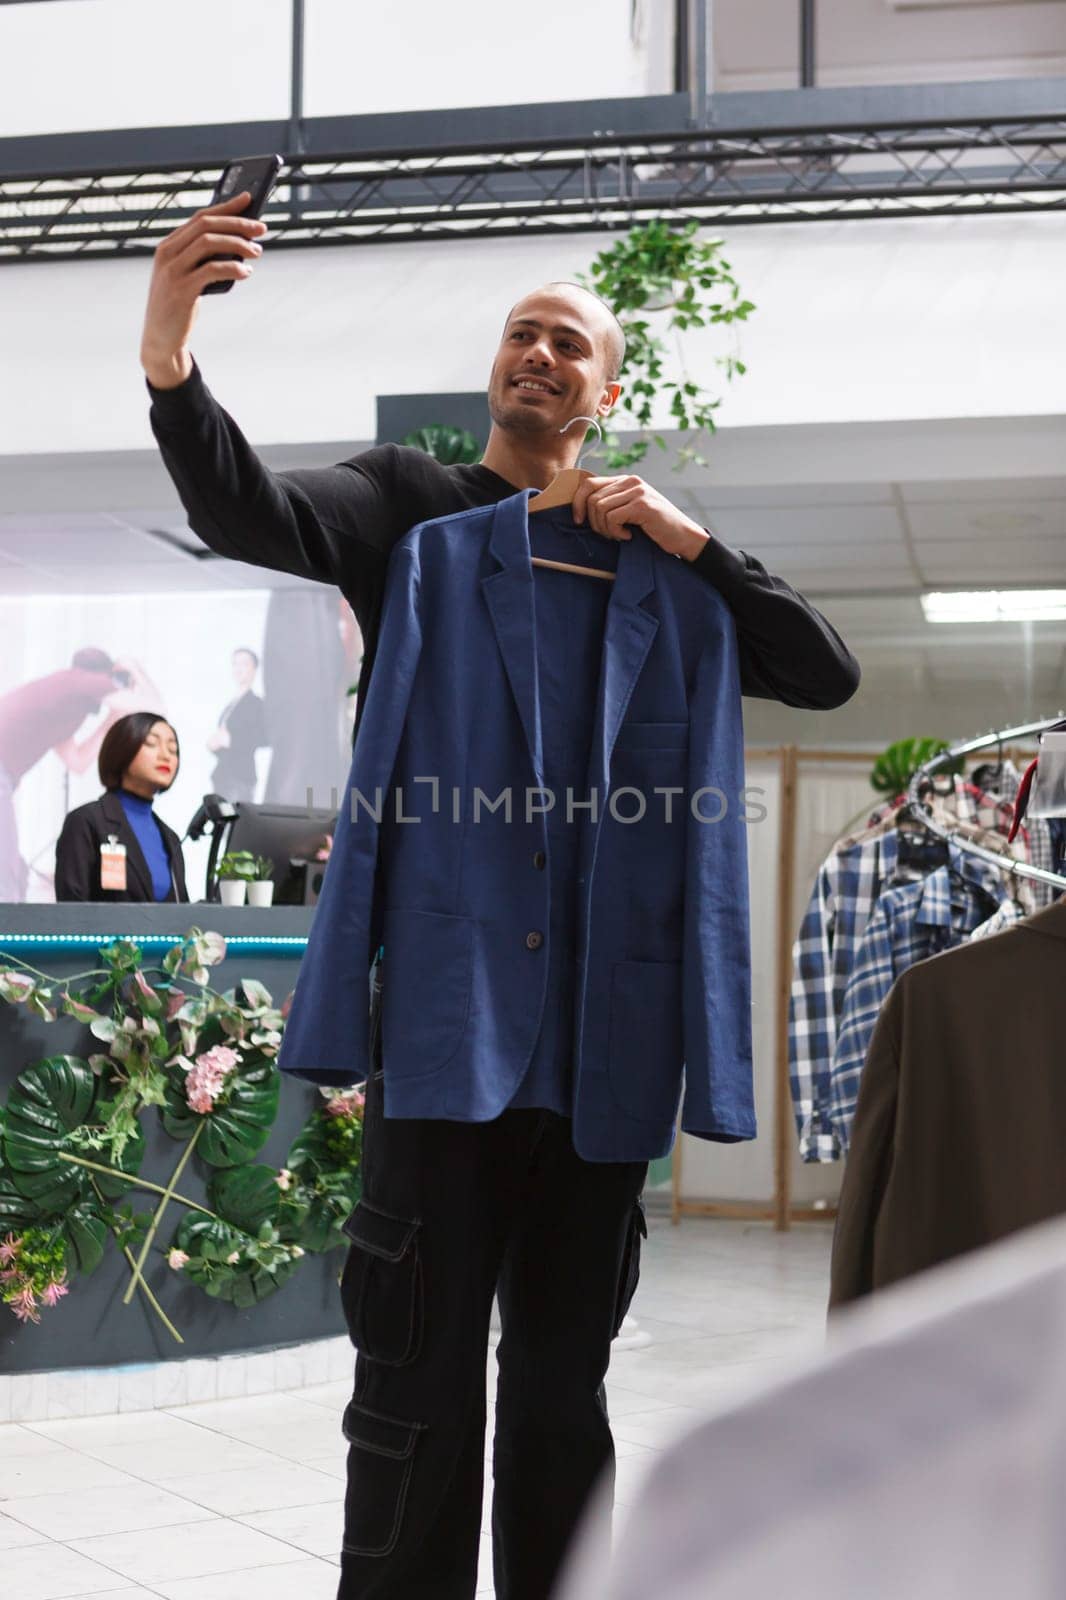 Clothing store arab man client holding jacket on hanger and taking photo on smartphone while browsing apparel in shopping mall. Boutique smiling buyer chatting in videocall and showing outfit